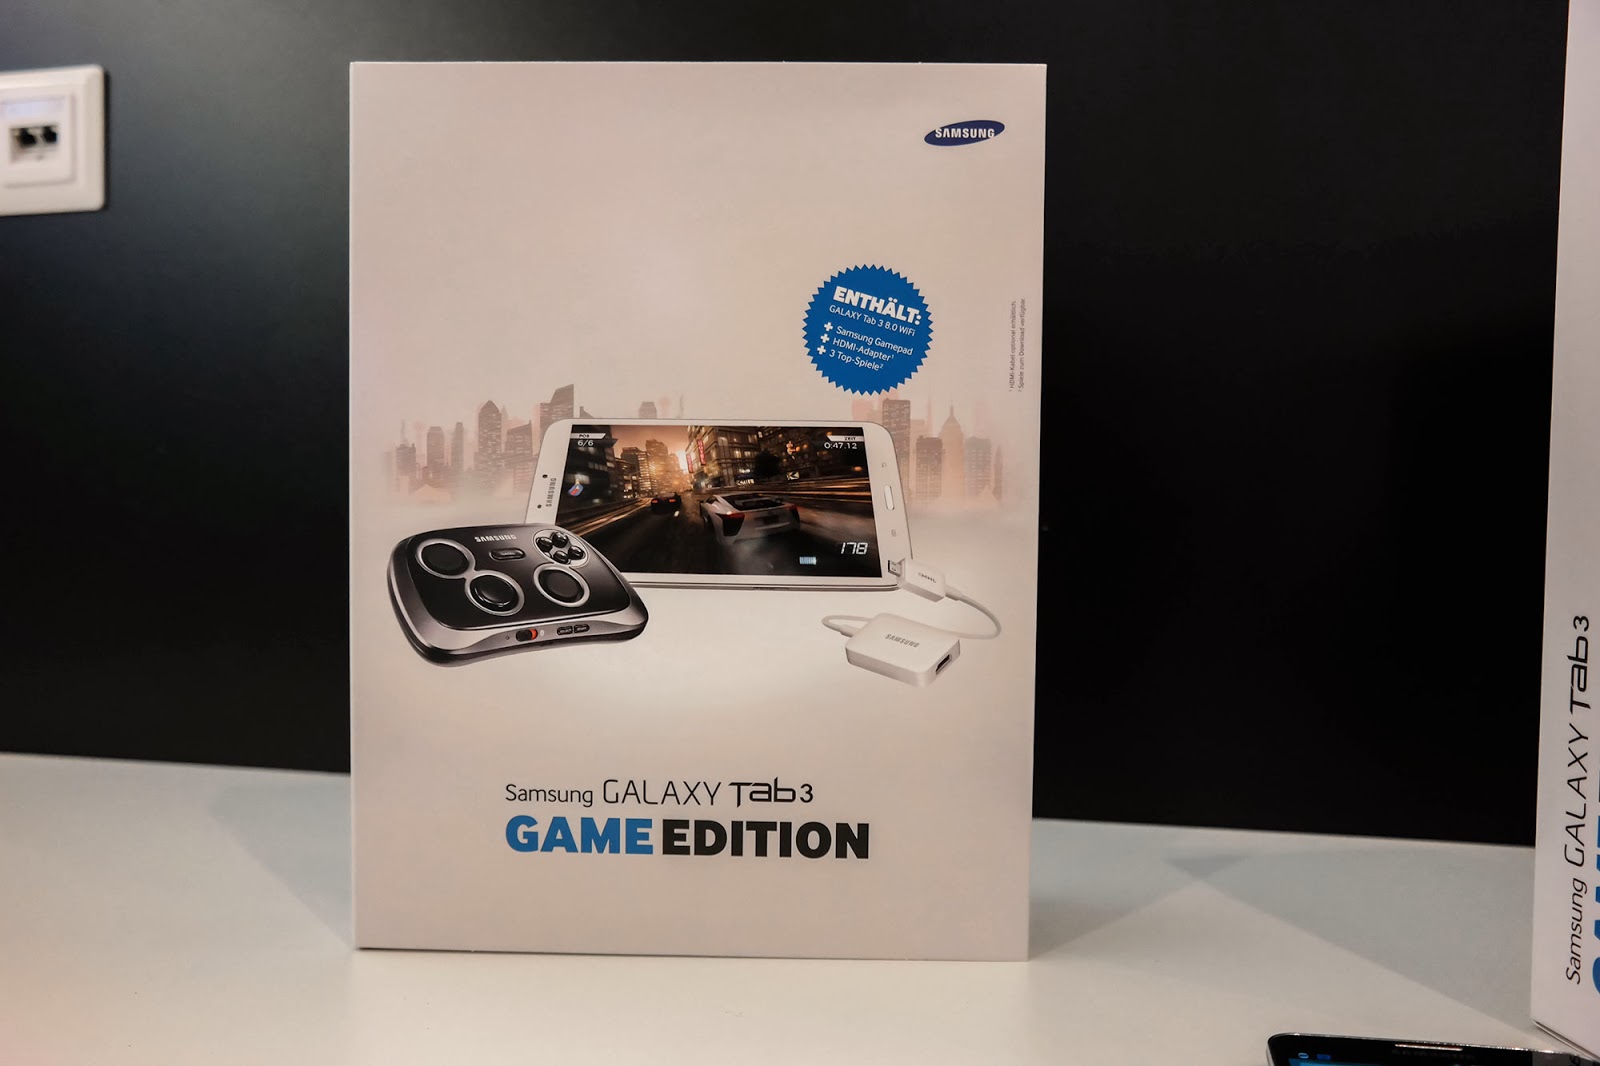 Galaxy Tab 3 game edition with game pad